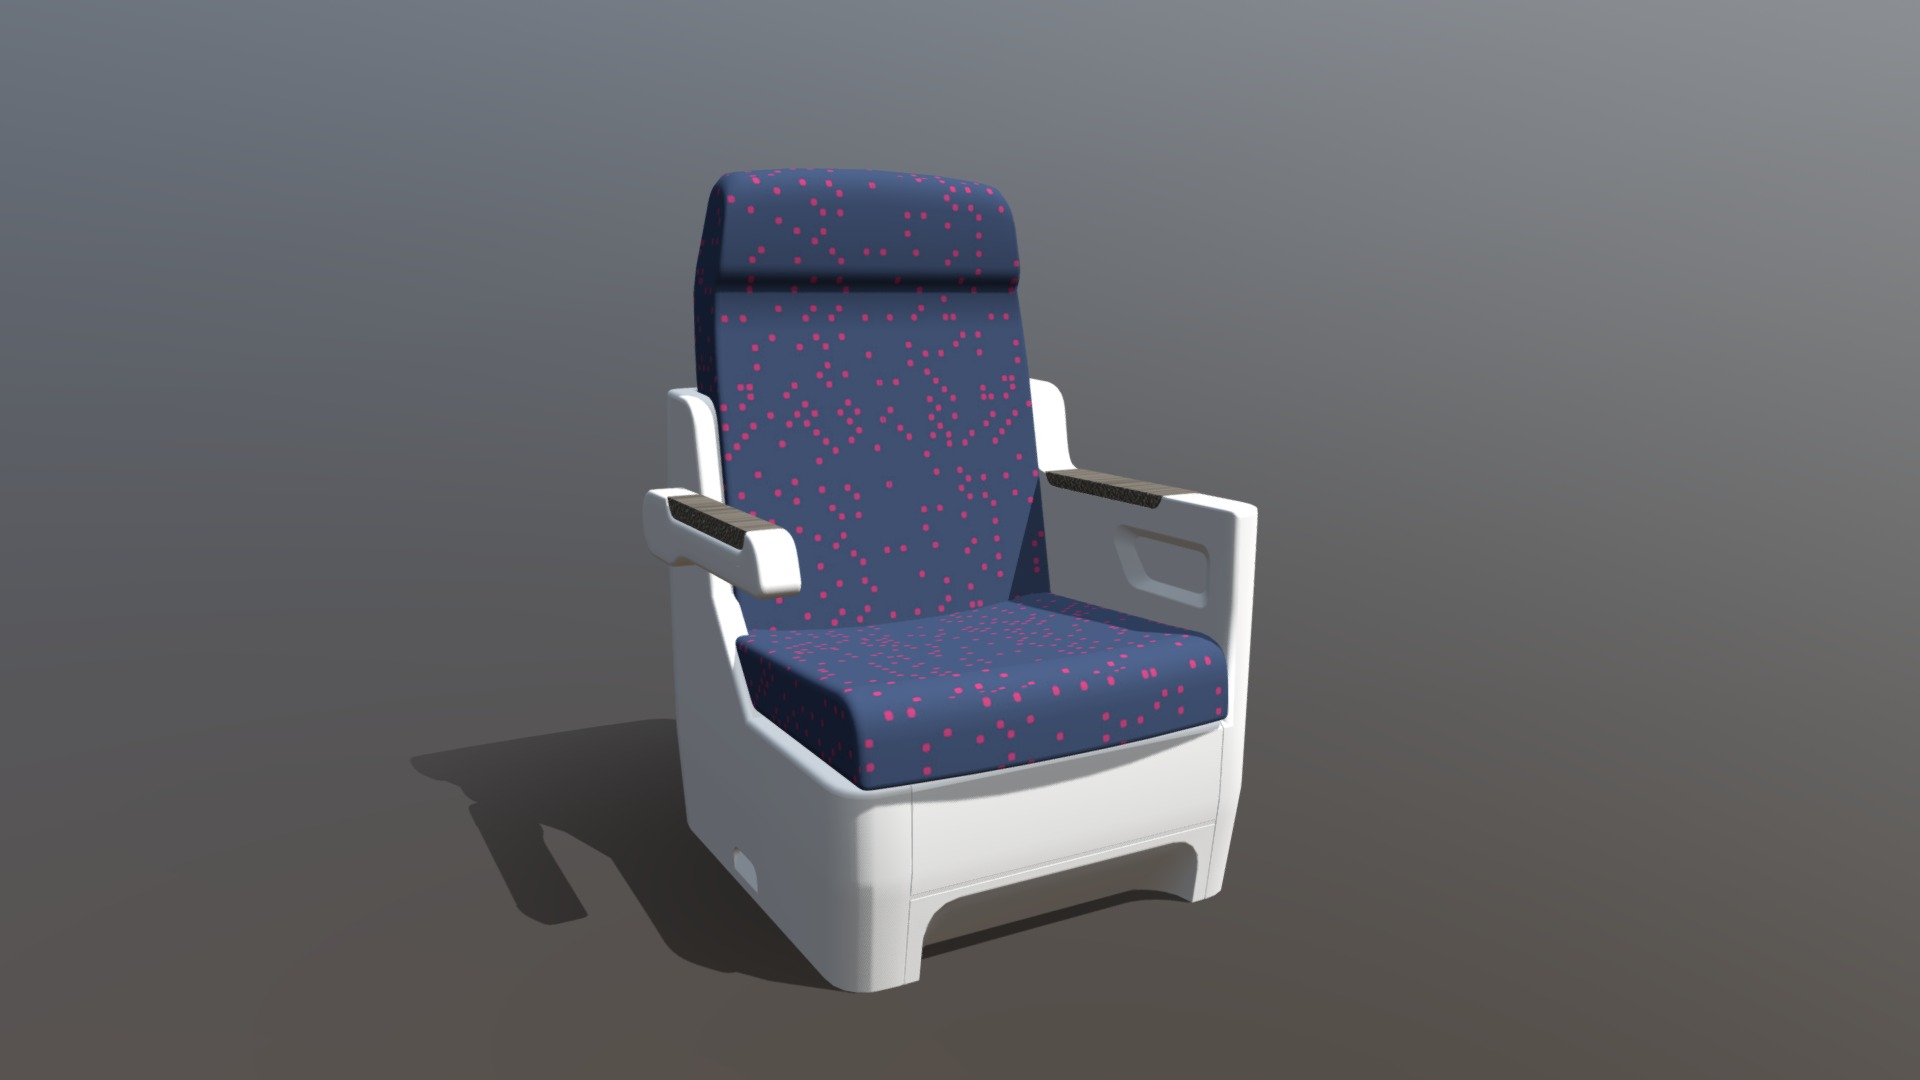 3D model Railway High Speed Railway Seat 014 - This is a 3D model of the Railway High Speed Railway Seat 014. The 3D model is about a chair with a cushion.